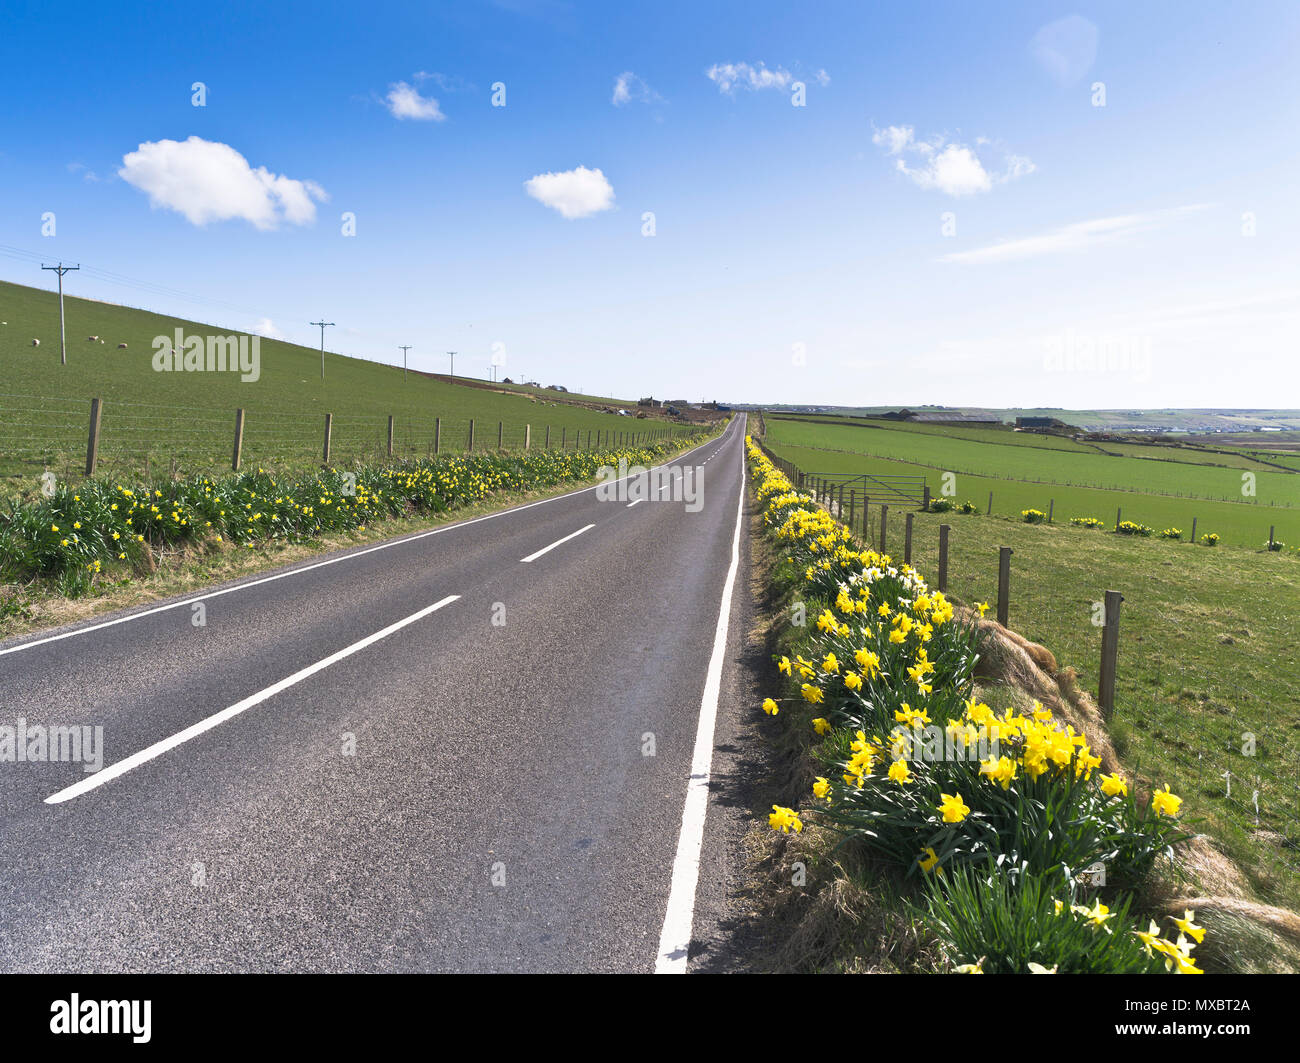 dh Empty ROAD ORKNEY Scottish isles deserted country road daffodils roadside verge flowers scotland daffodil spring sunny uk Stock Photo